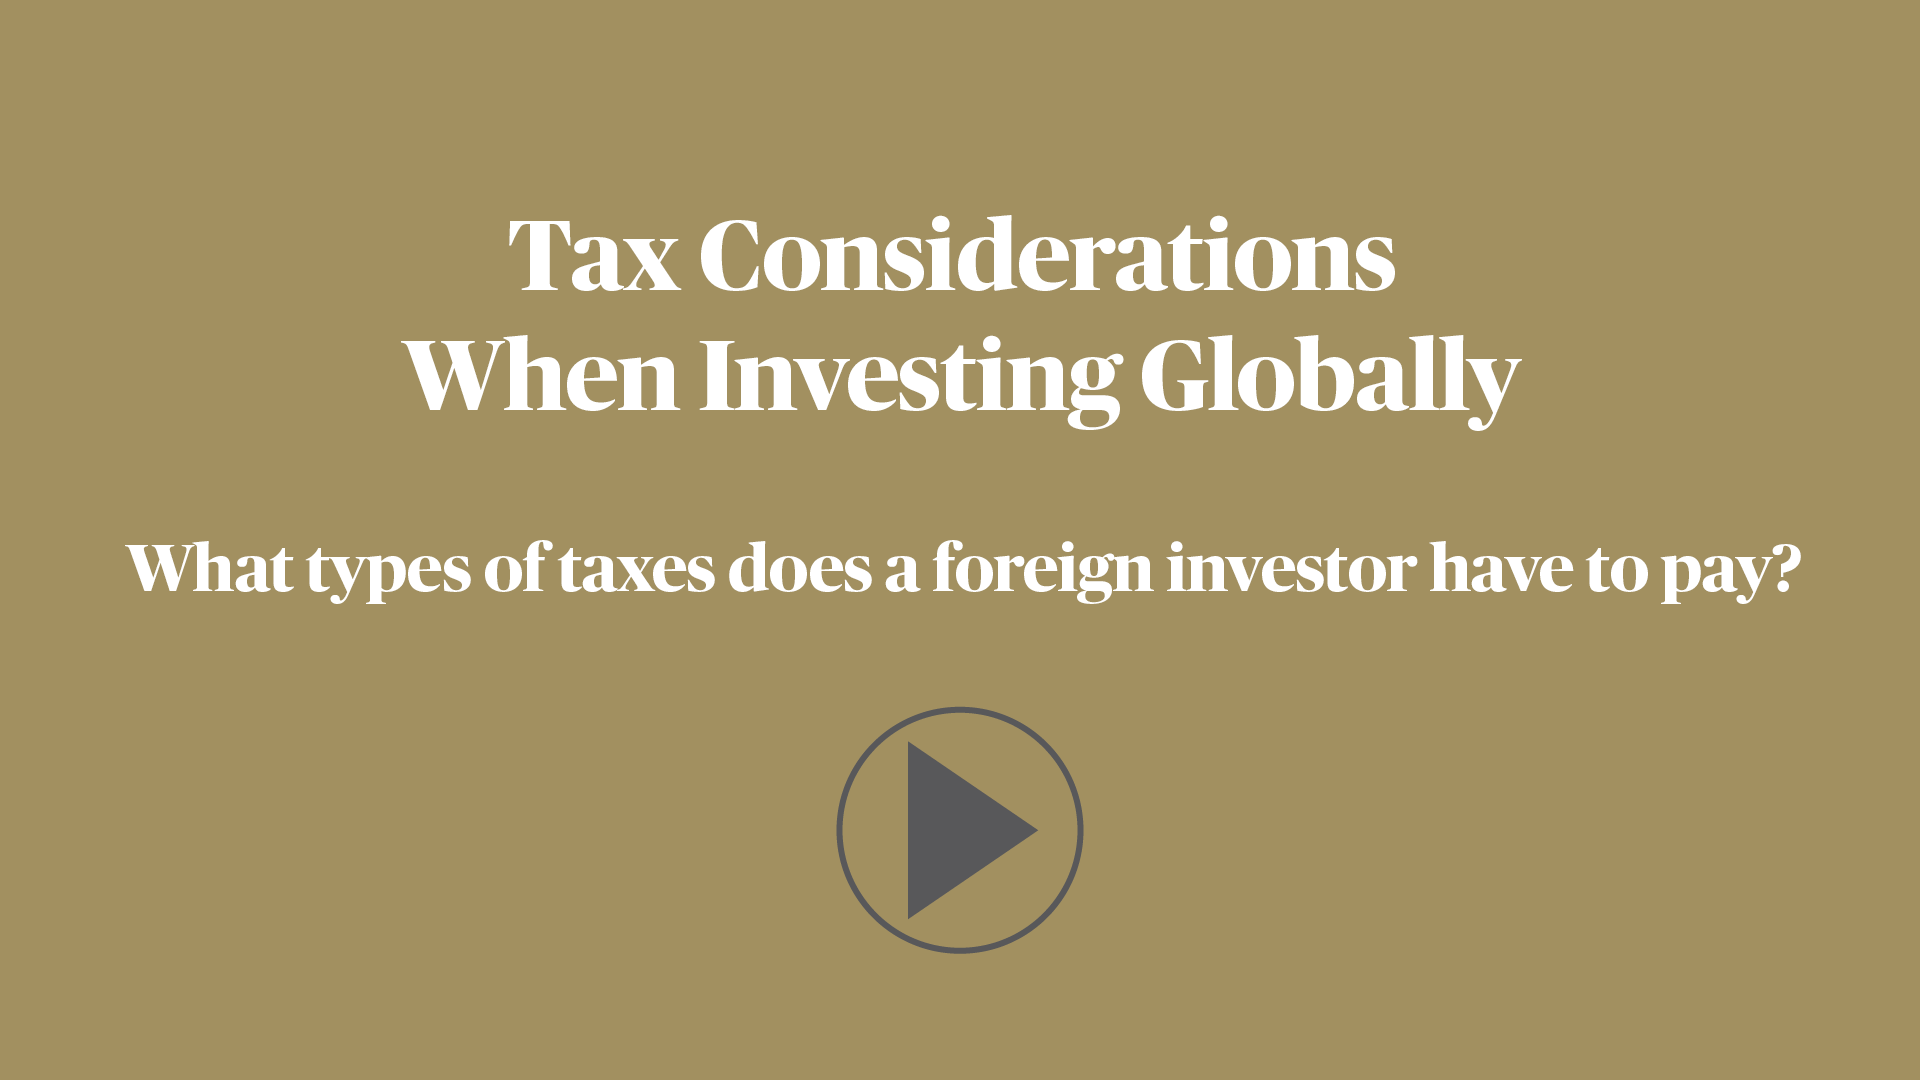 What types of taxes does a foreign investor have to pay?